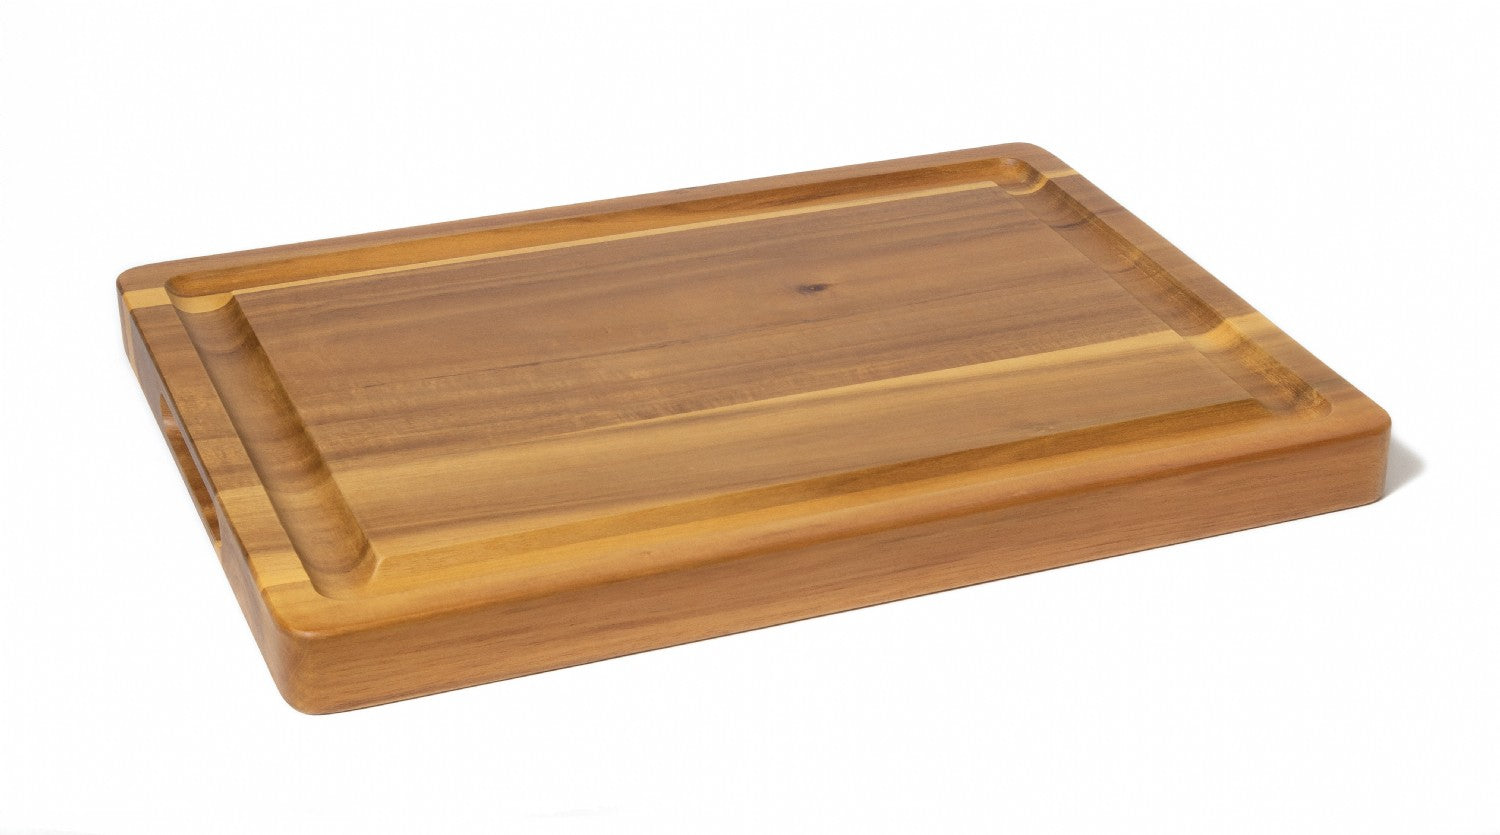 acacia thick carving board on a white background